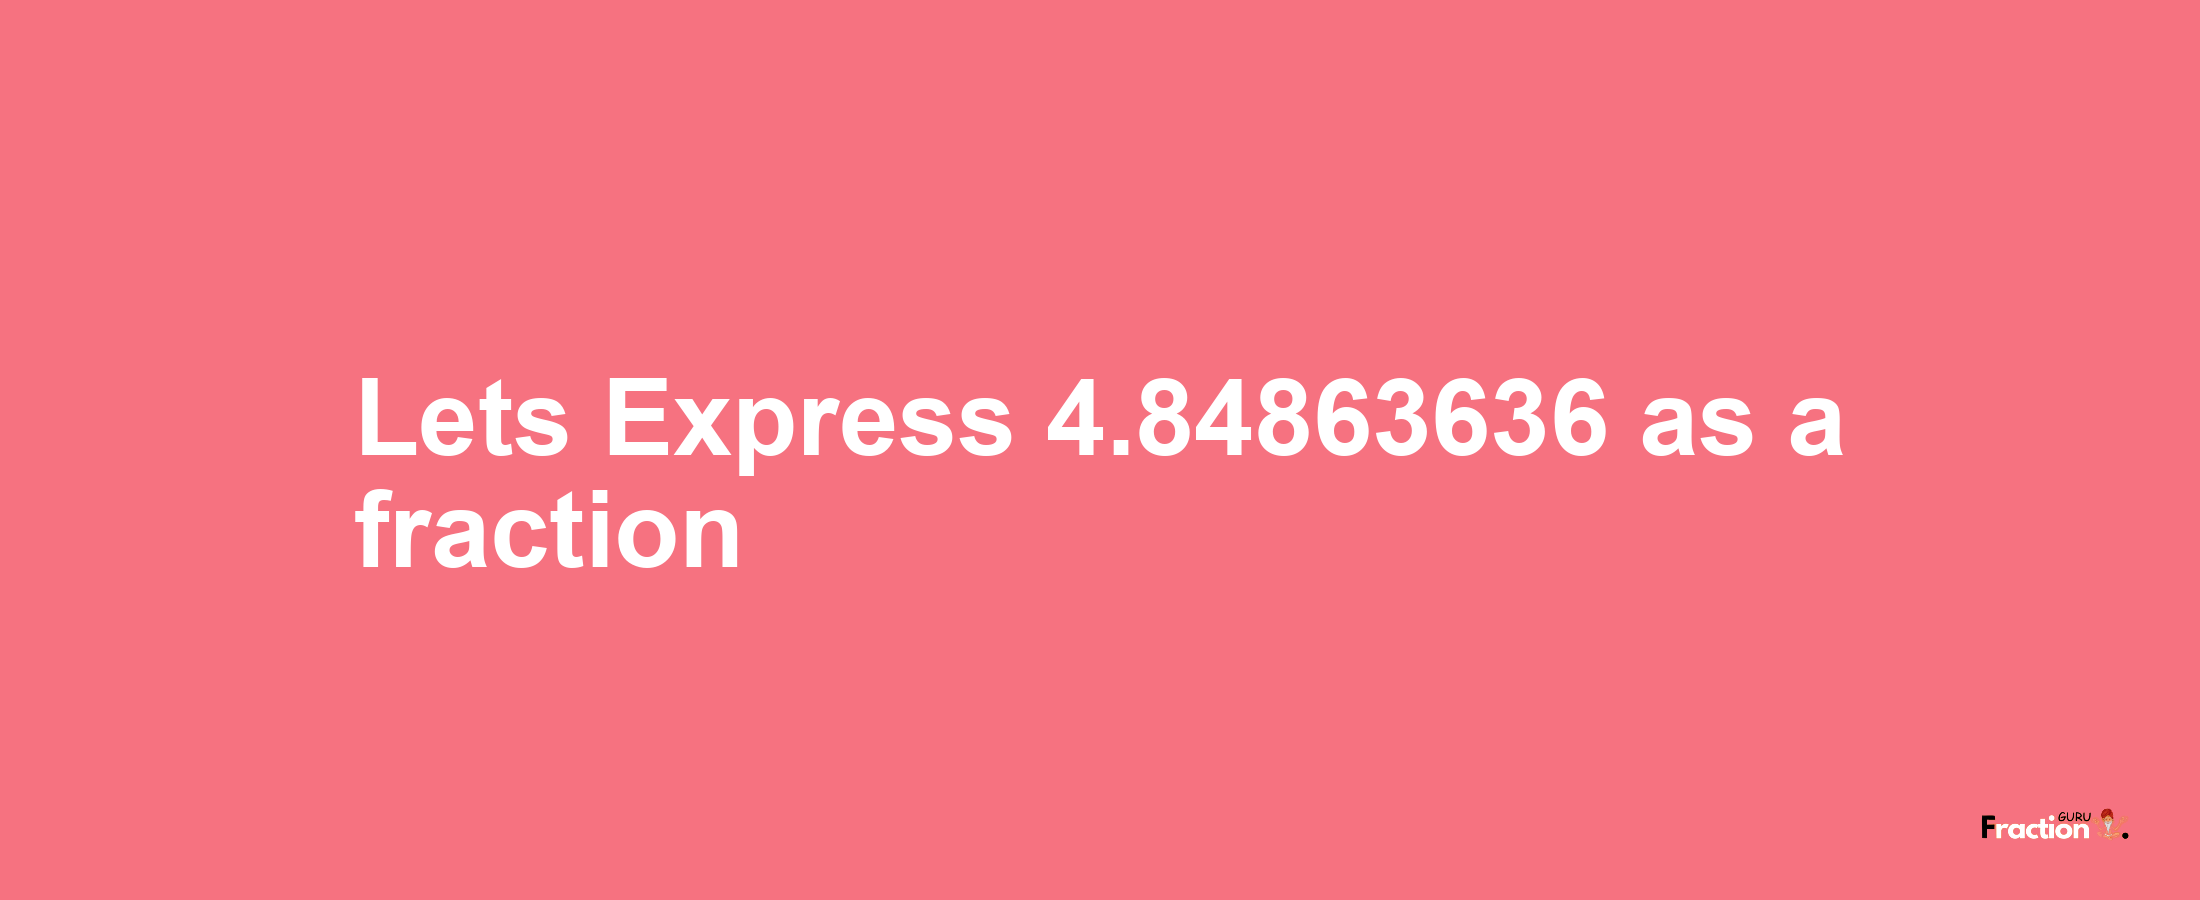 Lets Express 4.84863636 as afraction